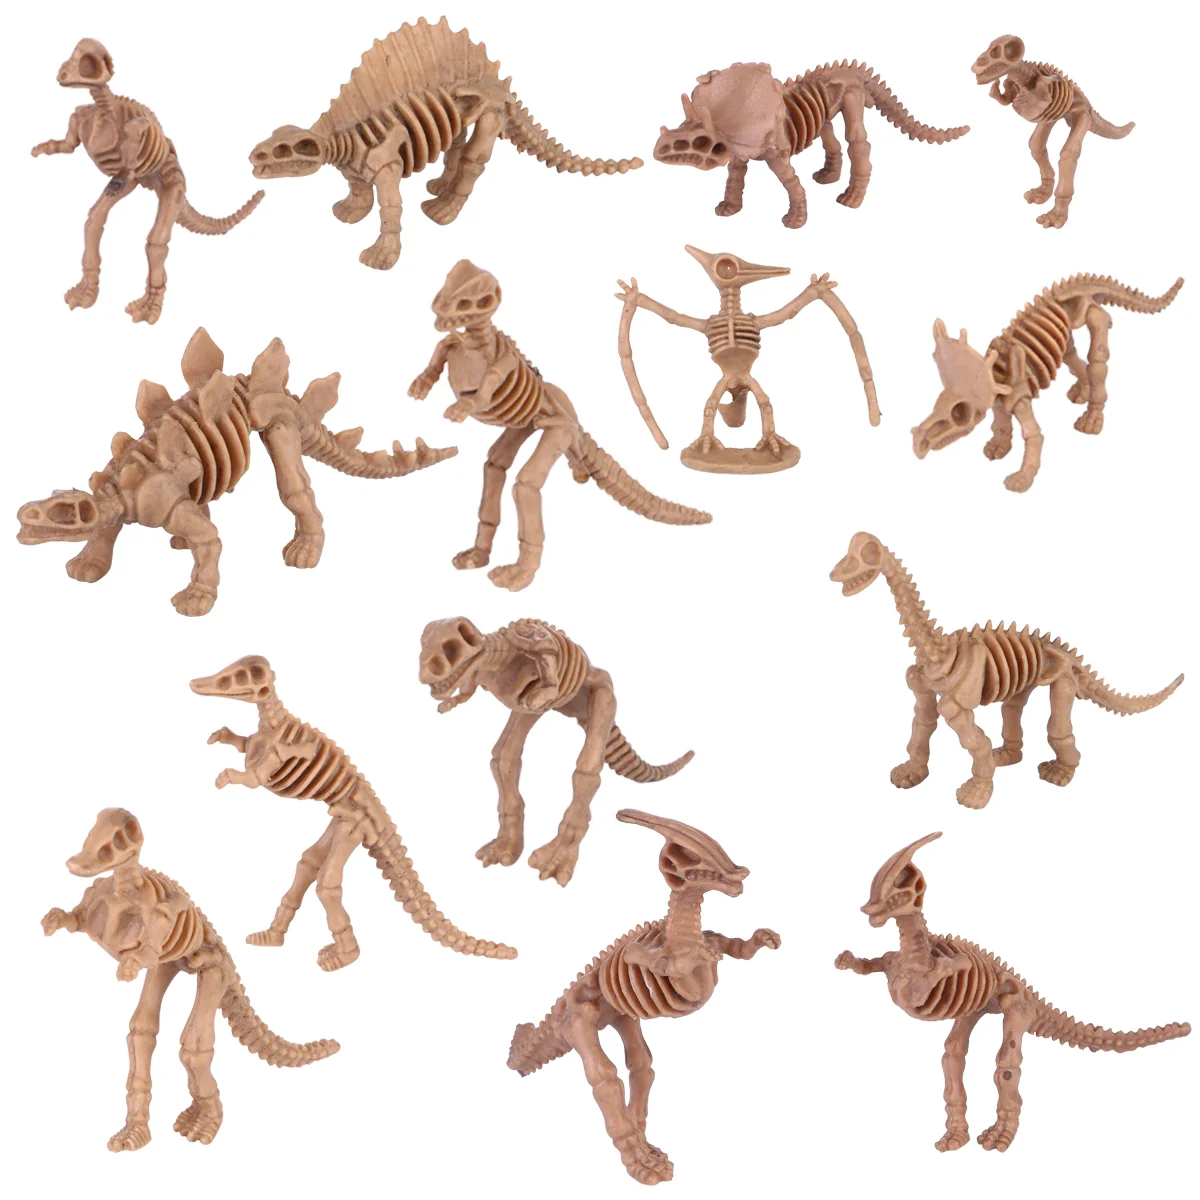 

Simulation Dinosaur Skeleton Bones Model Plastic Dinosaur Fossil Toy Educational Toys Action Figure Collection Toy For Kid